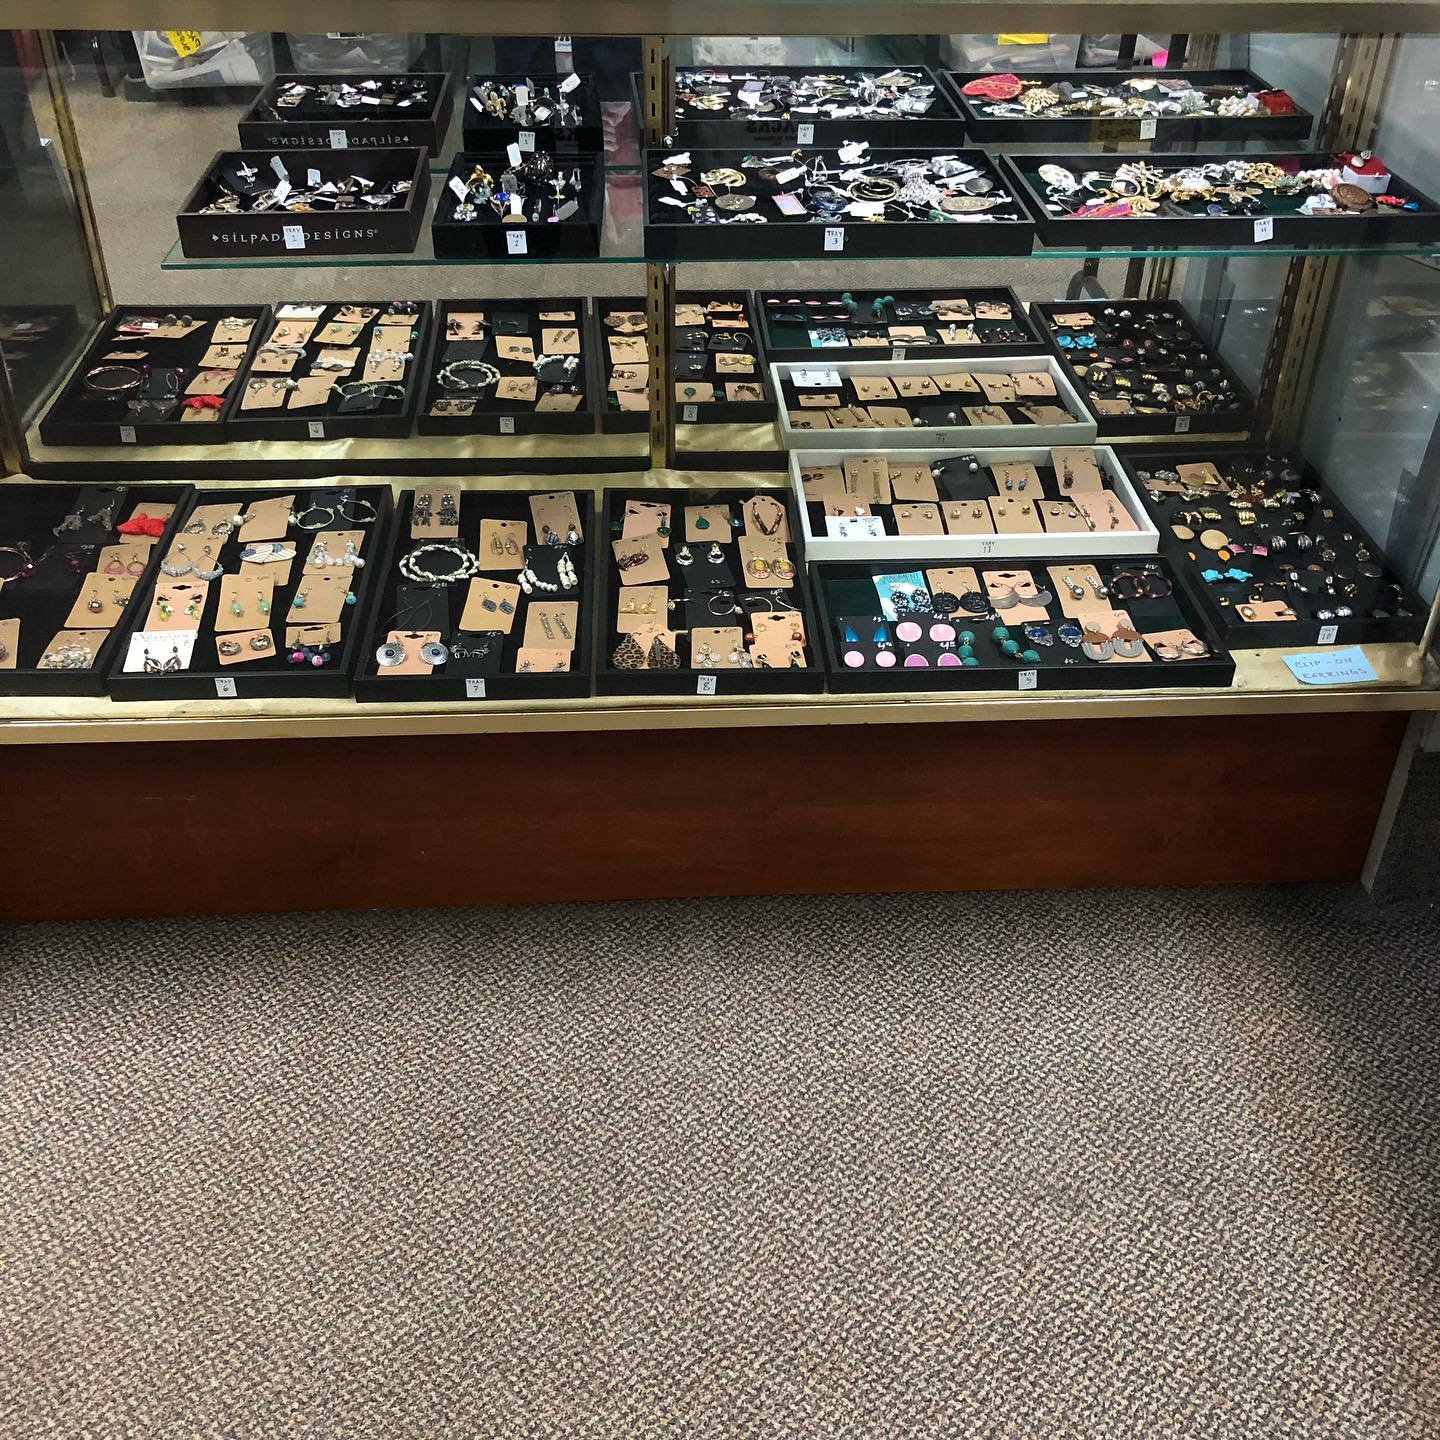 Diversity Thrift has a wide variety of jewelry at great prices! Come see us. We&rsquo;re open 10am-6pm at 1407 Sherwood Ave. RVA 23220 (804) 353-8890. DiversityThrift.org
#jewelry #thriftjewelry #usedjewelry